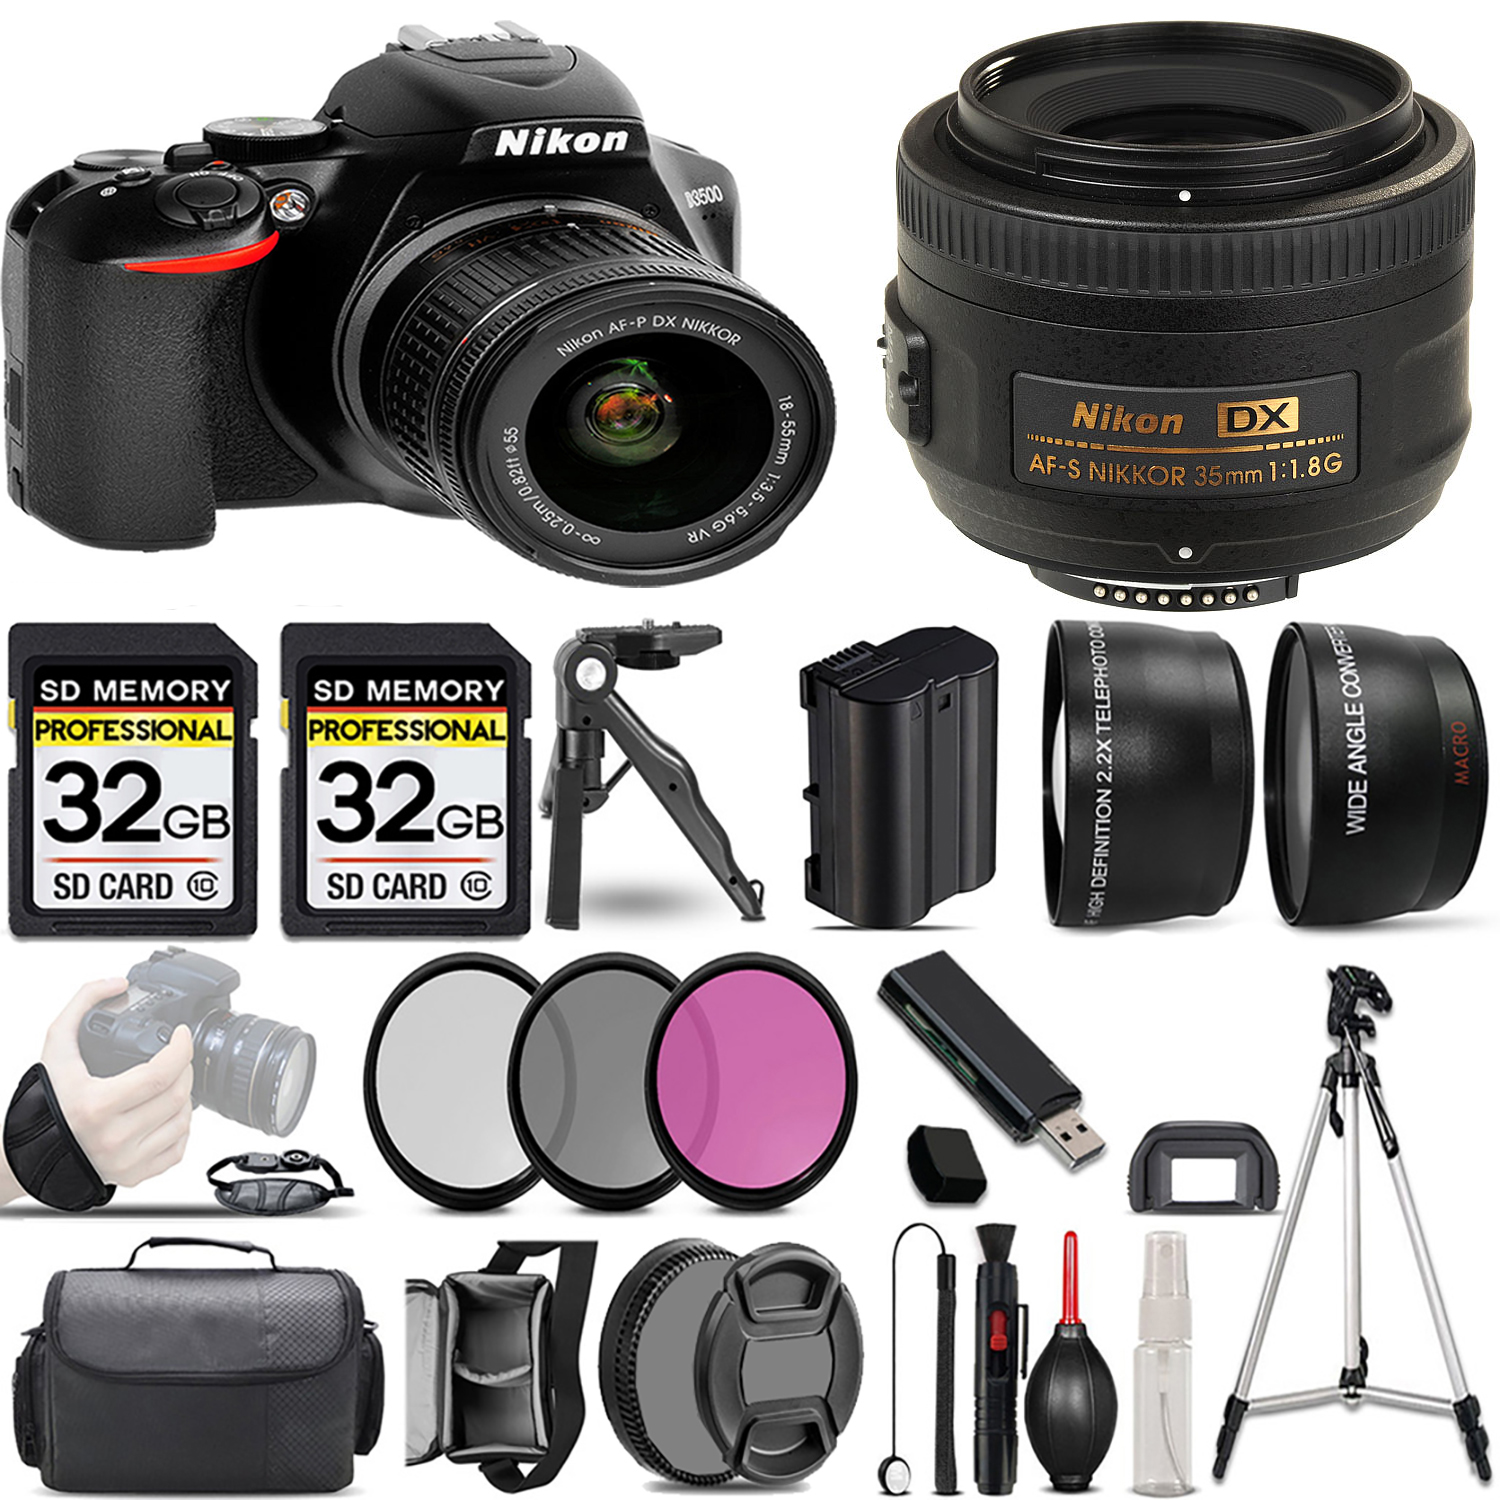 D3500 DSLR Camera with 18-55mm Lens + 35mm f/1.8 G Lens + 3 Piece Filter Set + 64GB *FREE SHIPPING*